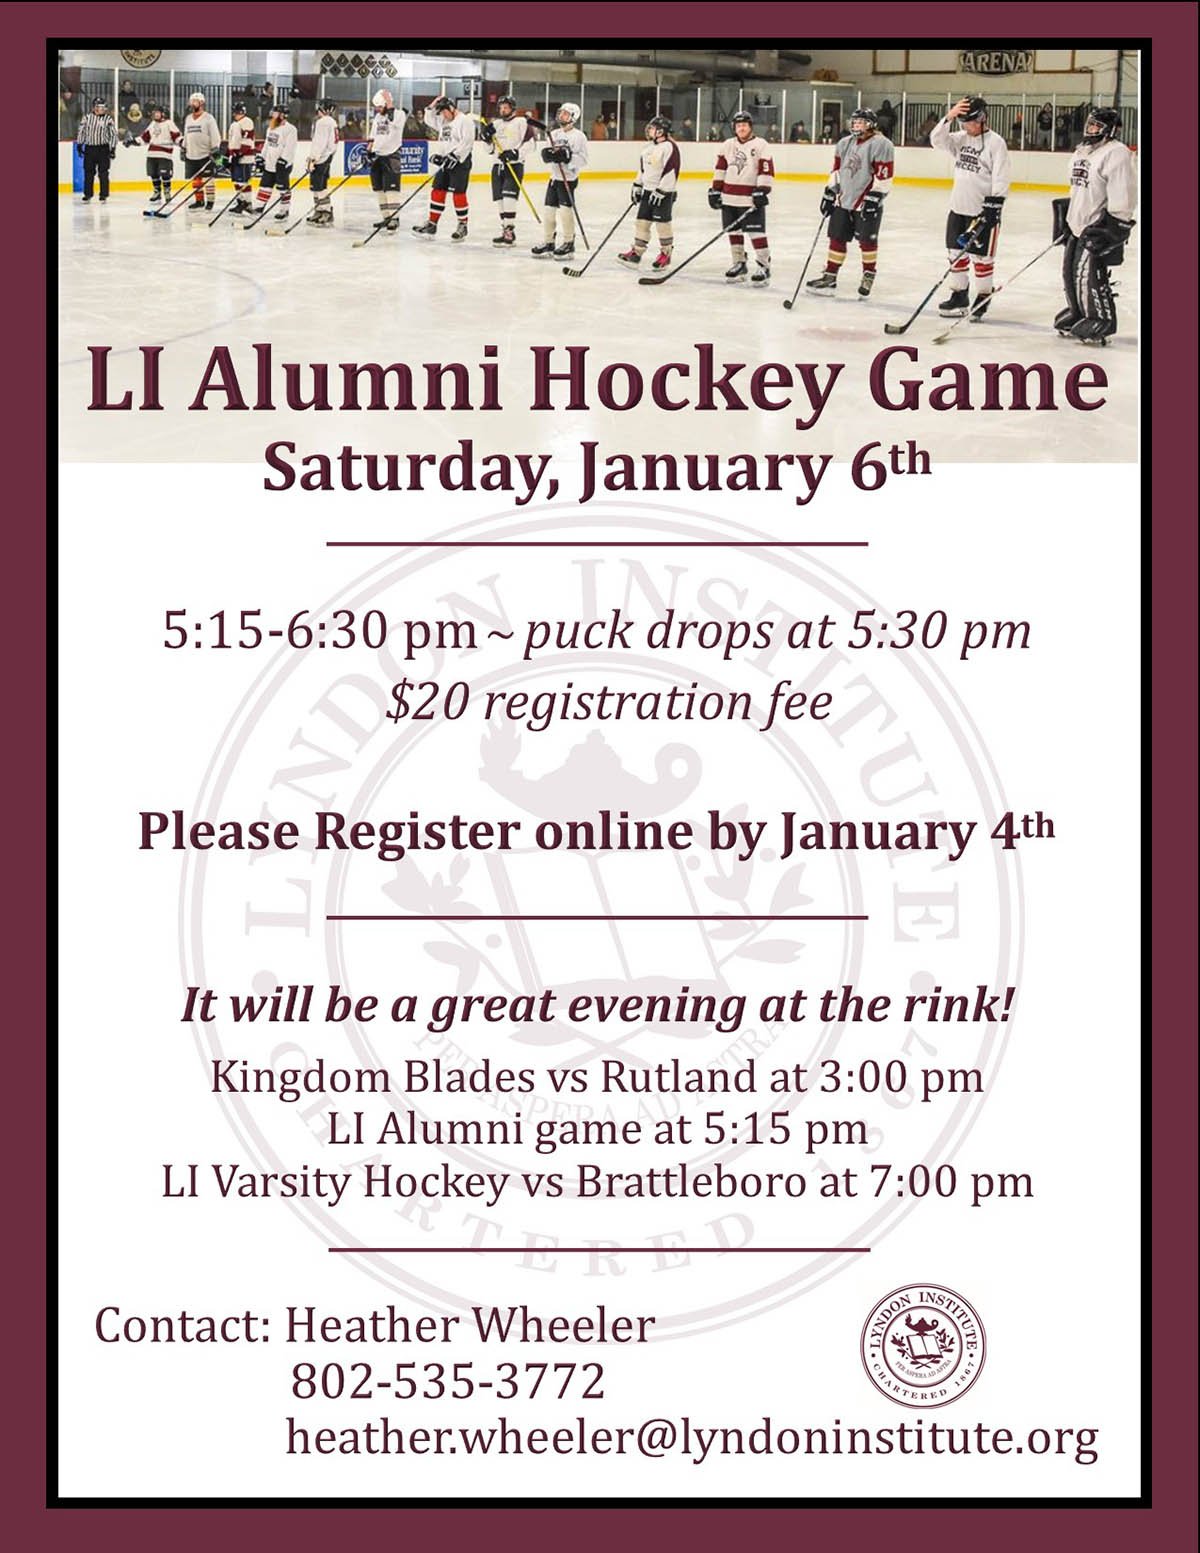 REGISTRATION IS NOW OPEN FOR THE 2024 LI ALUMNI HOCKEY GAME ON JANUARY 6th  Register online here by January 4th: https://www.lyndoninstitute.org/alumni/2024-alumni-hockey-game-registration  Or Contact: Heather Wheeler heather.wheeler@lyndoninstitute.org 802-535-3772